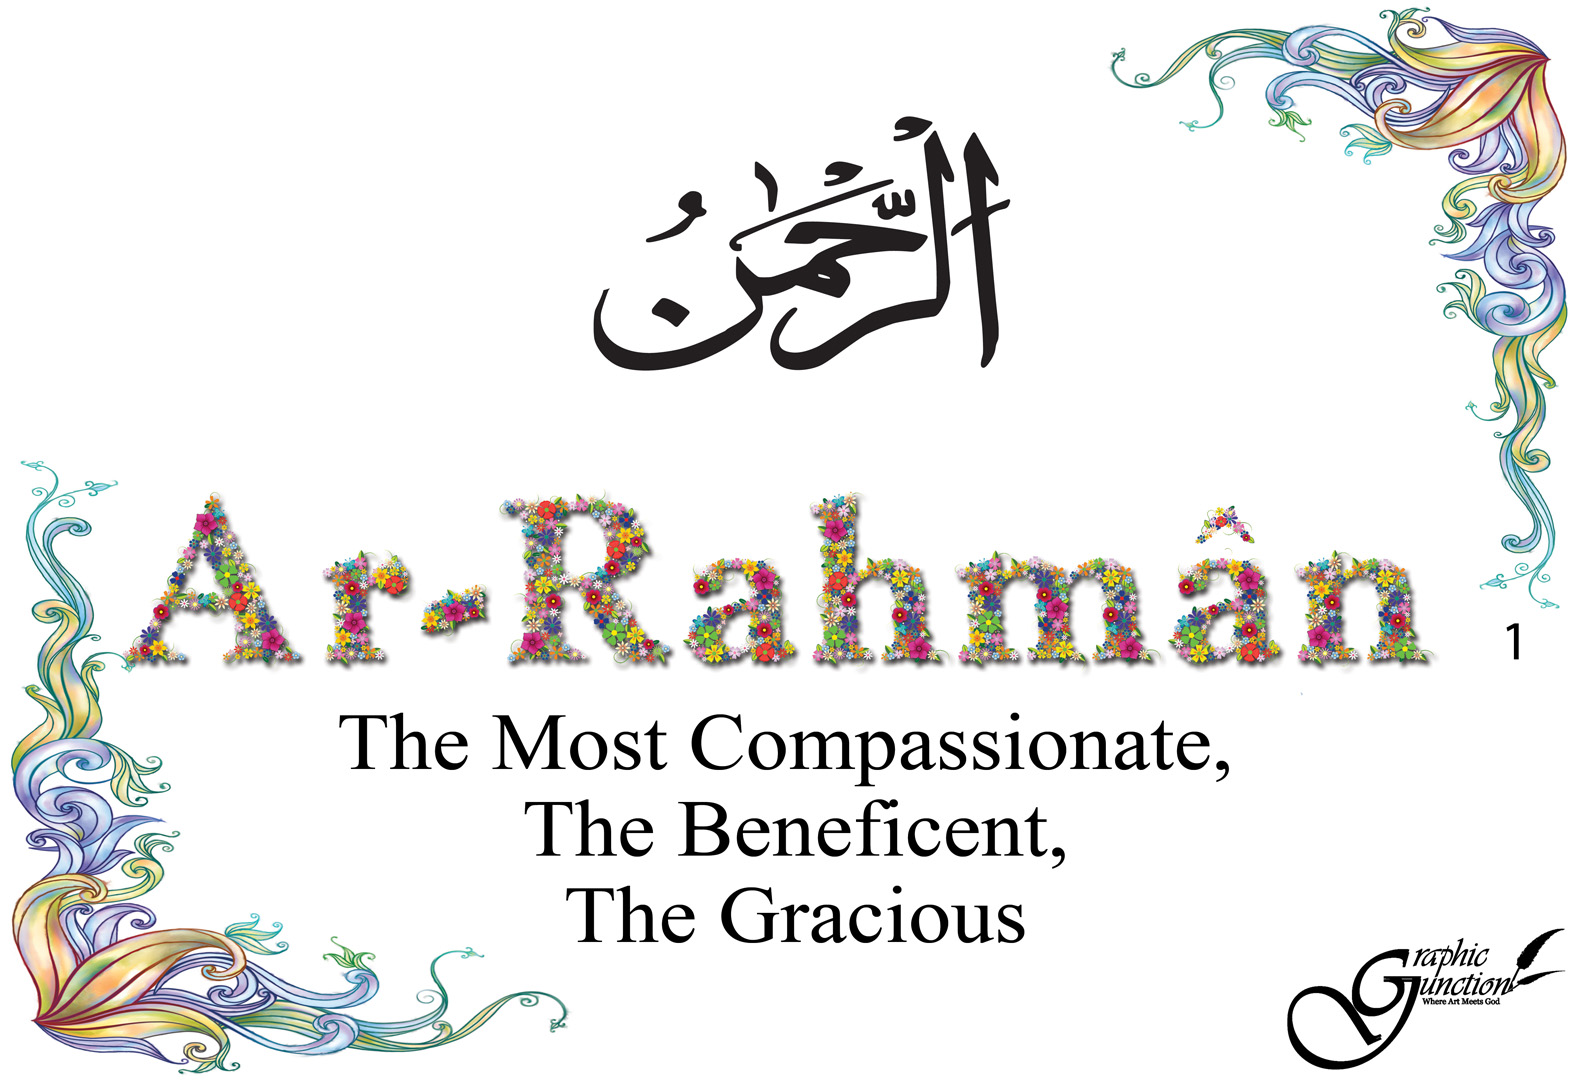 Ar-Rahman - The Compassionate, The Beneficent, The Gracious